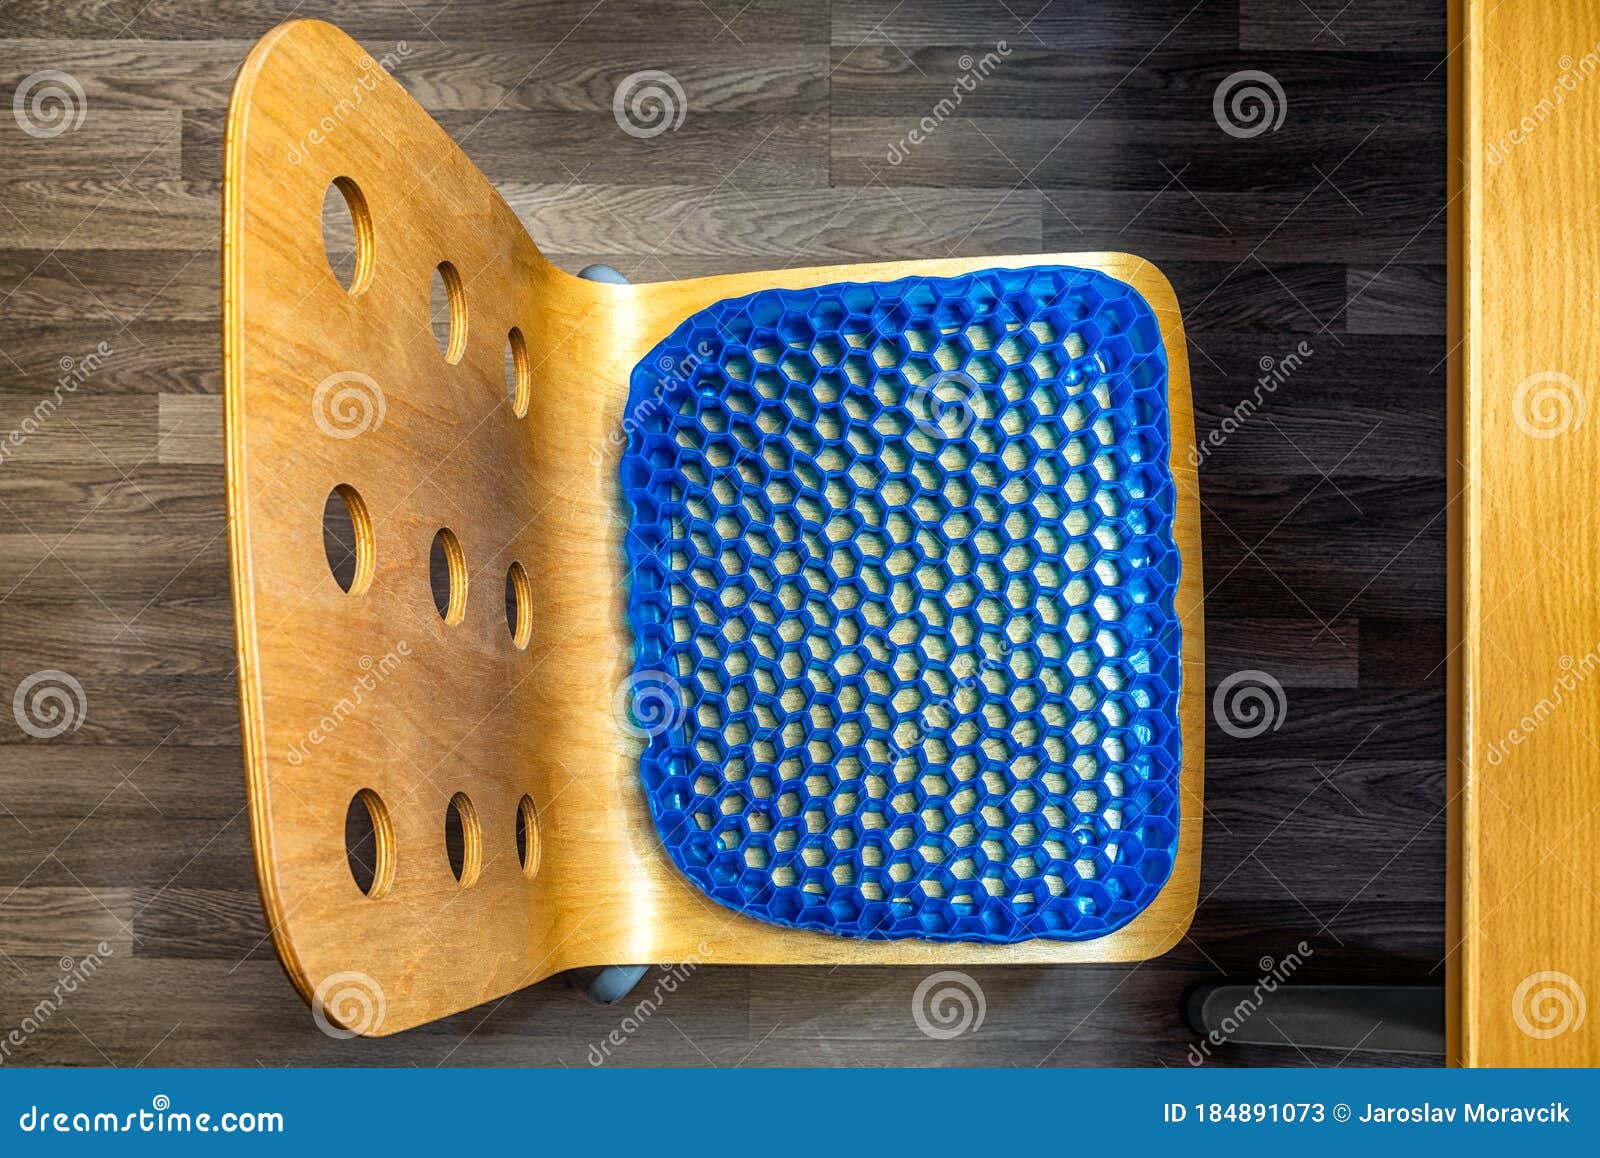 Ergonomic Office Chair Pad Seat Cushion Stock Image Image Of Chair Office 184891073